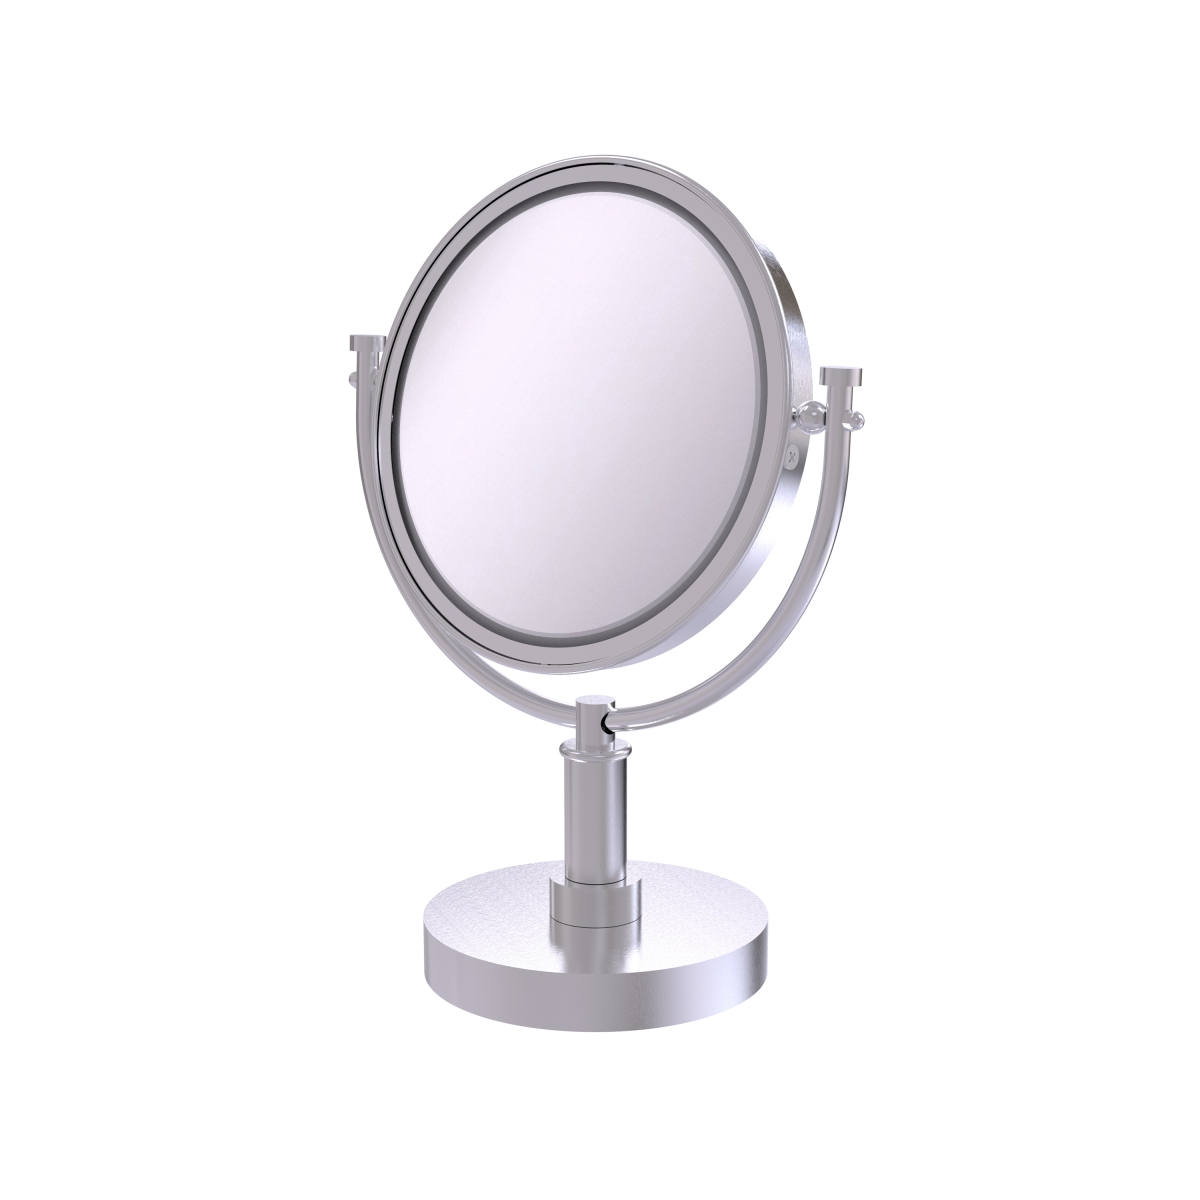 Picture of Allied Brass DM-4-5X-SCH 8 in. Vanity Top Make-Up Mirror 5X Magnification, Satin Chrome - 15 x 8 x 8 in.